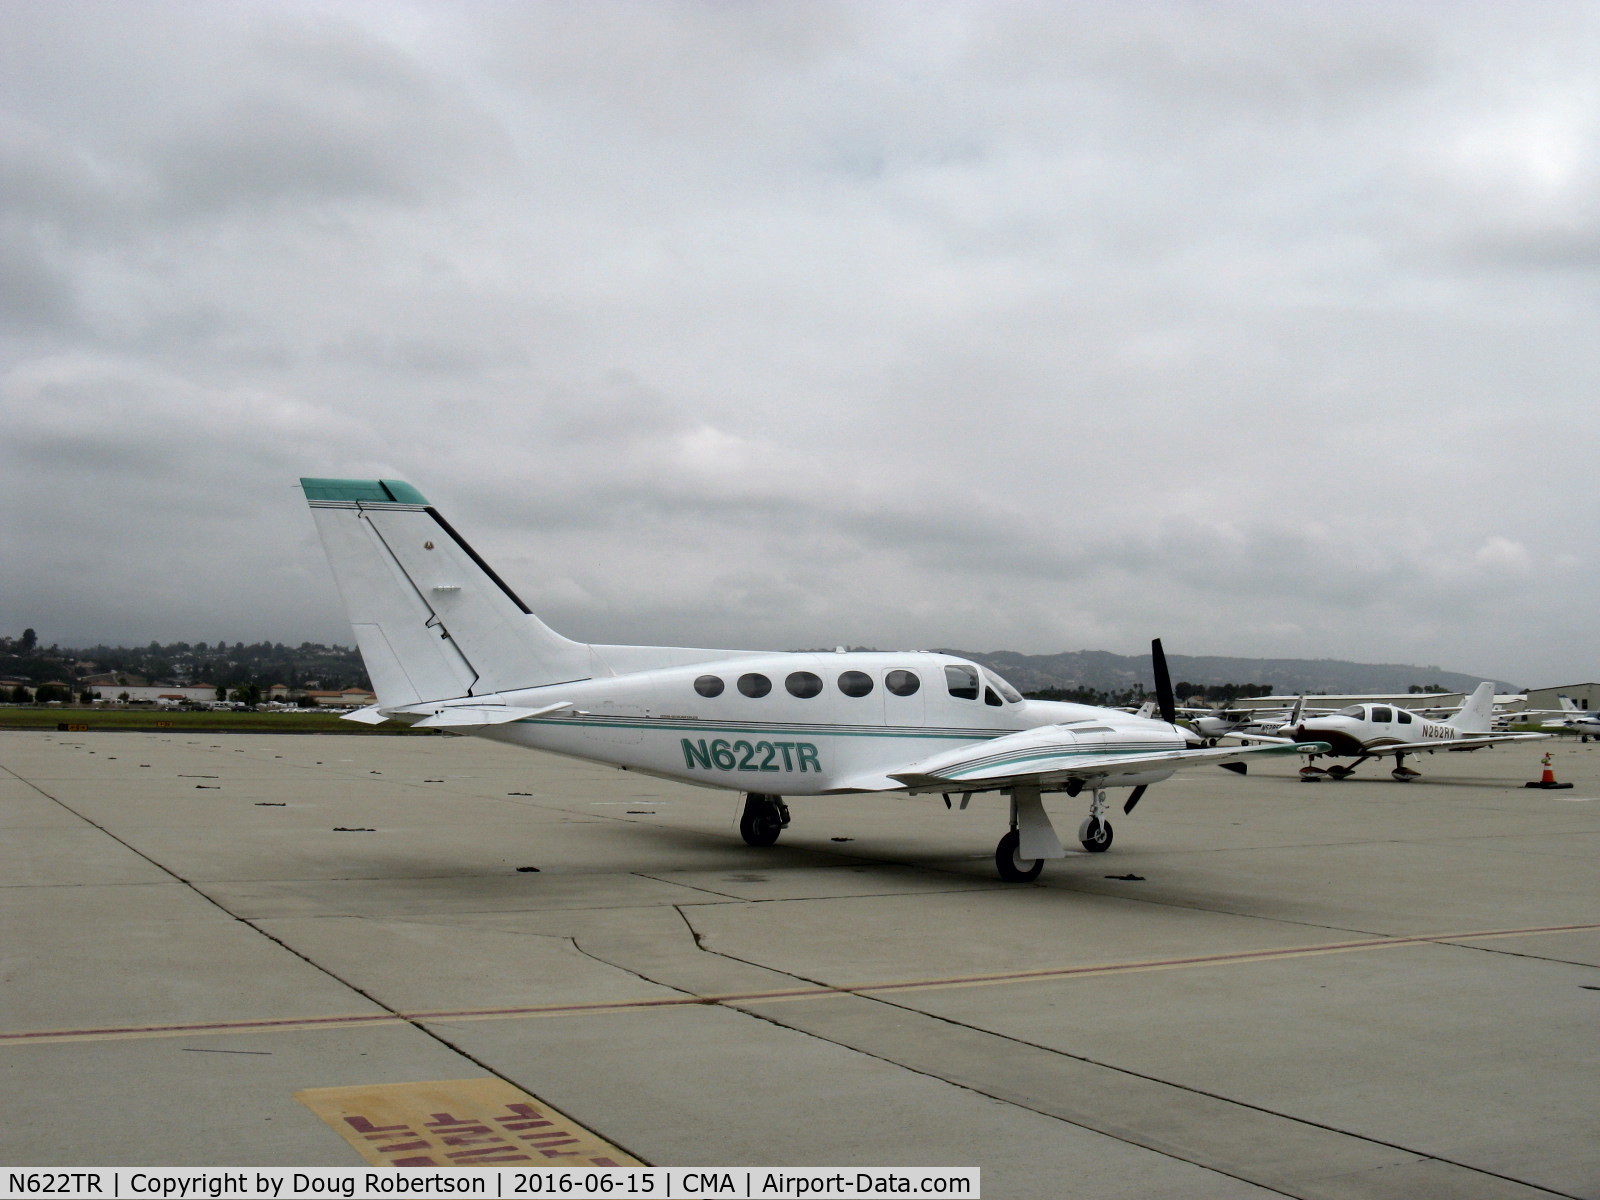 N622TR, 1980 Cessna 421C Golden Eagle C/N 421C0858, 1980 Cessna 421C GOLDEN EAGLE, two Continental GTSIO-520-N geared, turbo-supercharged 375 Hp each, just arrived and shut down on ramp